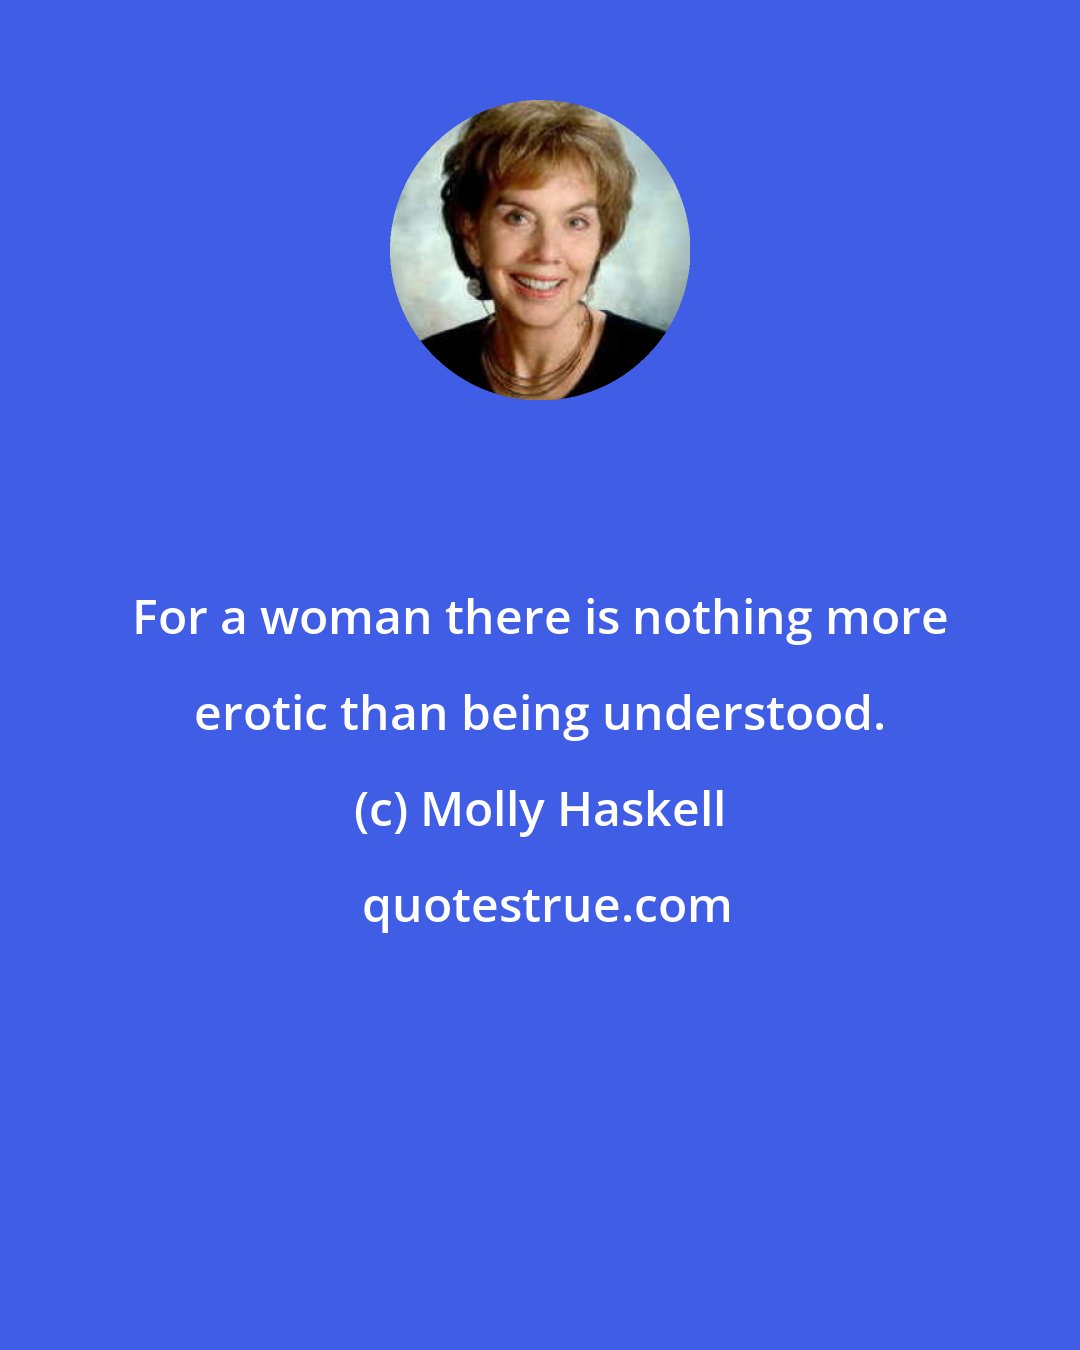 Molly Haskell: For a woman there is nothing more erotic than being understood.